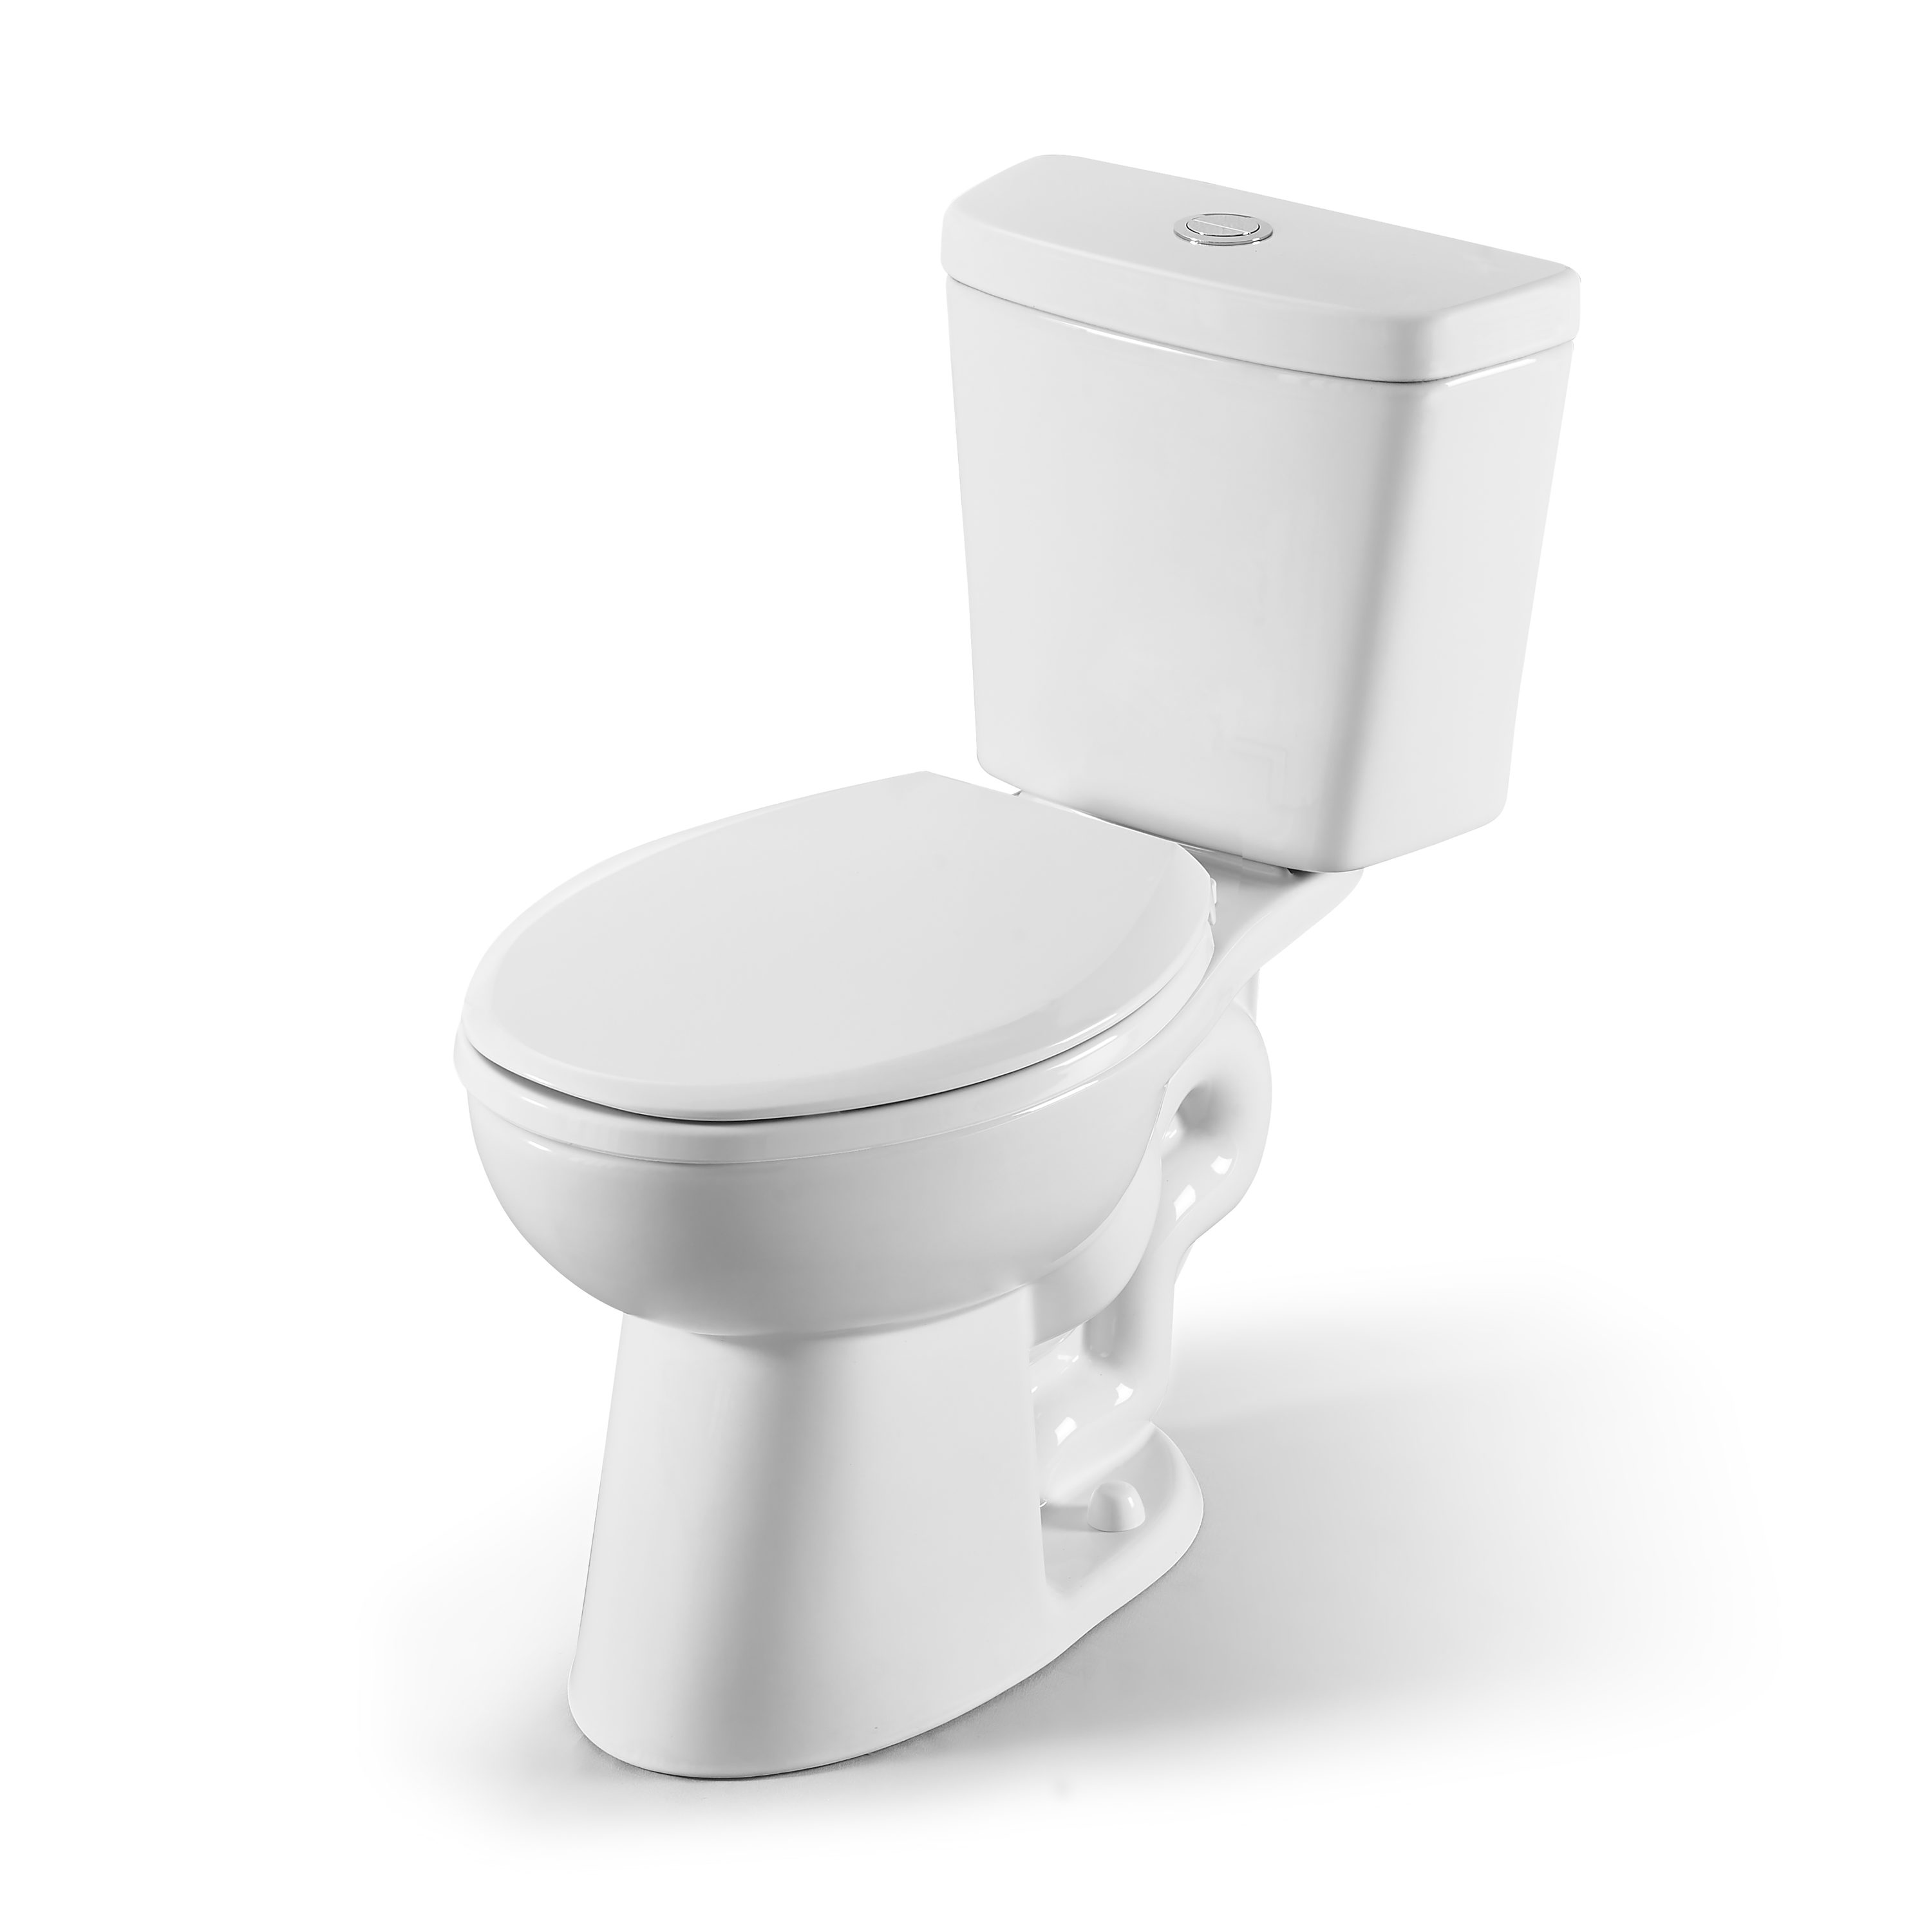 Here's why toilet flush has one large and one small button